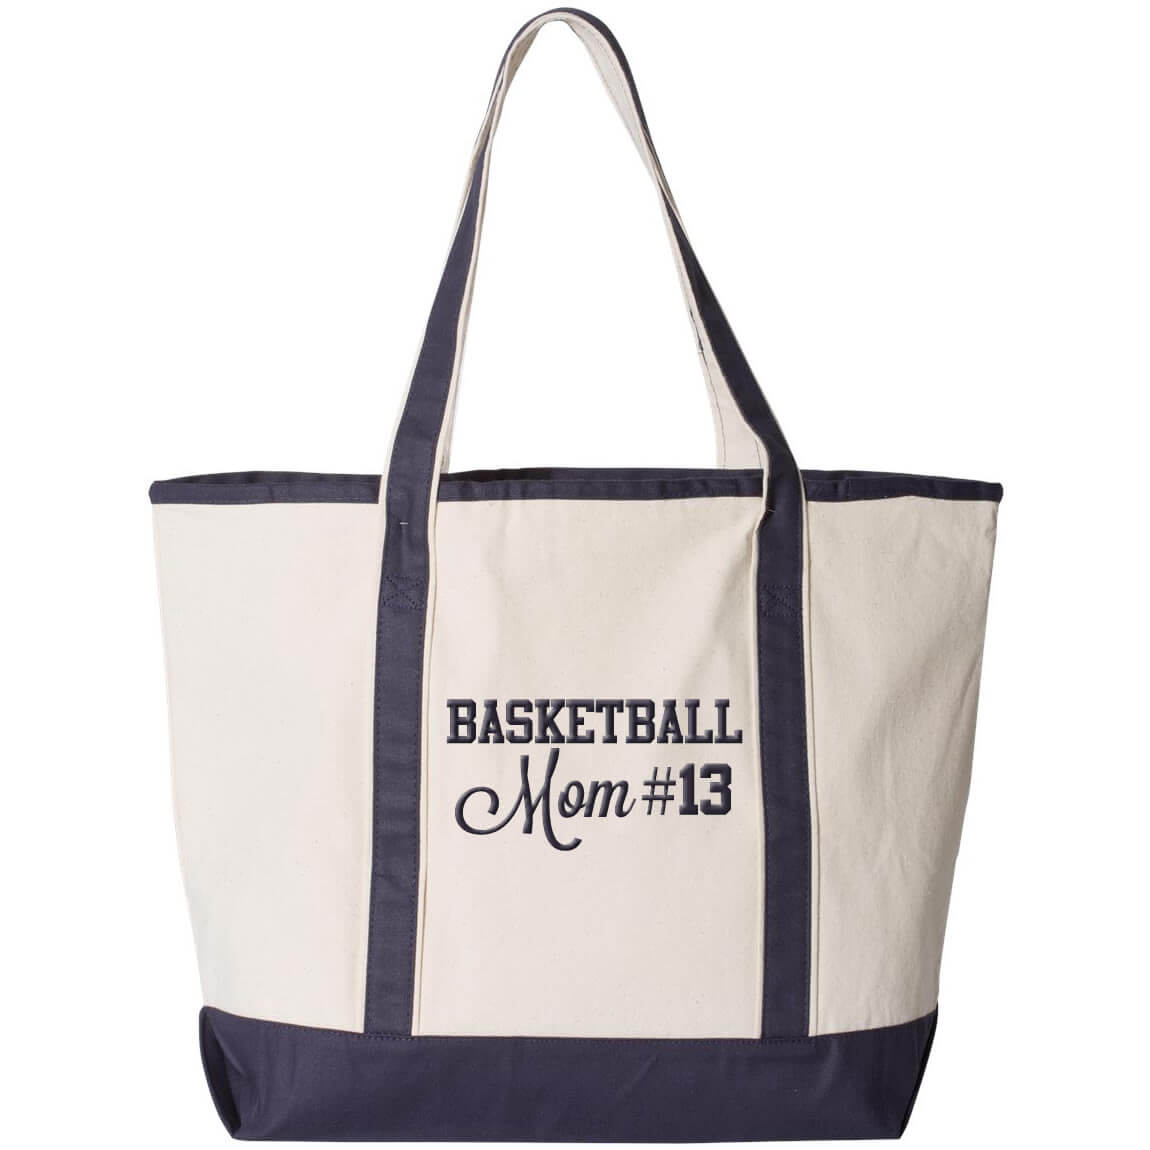 Basketball Mom Tote Bag with Number